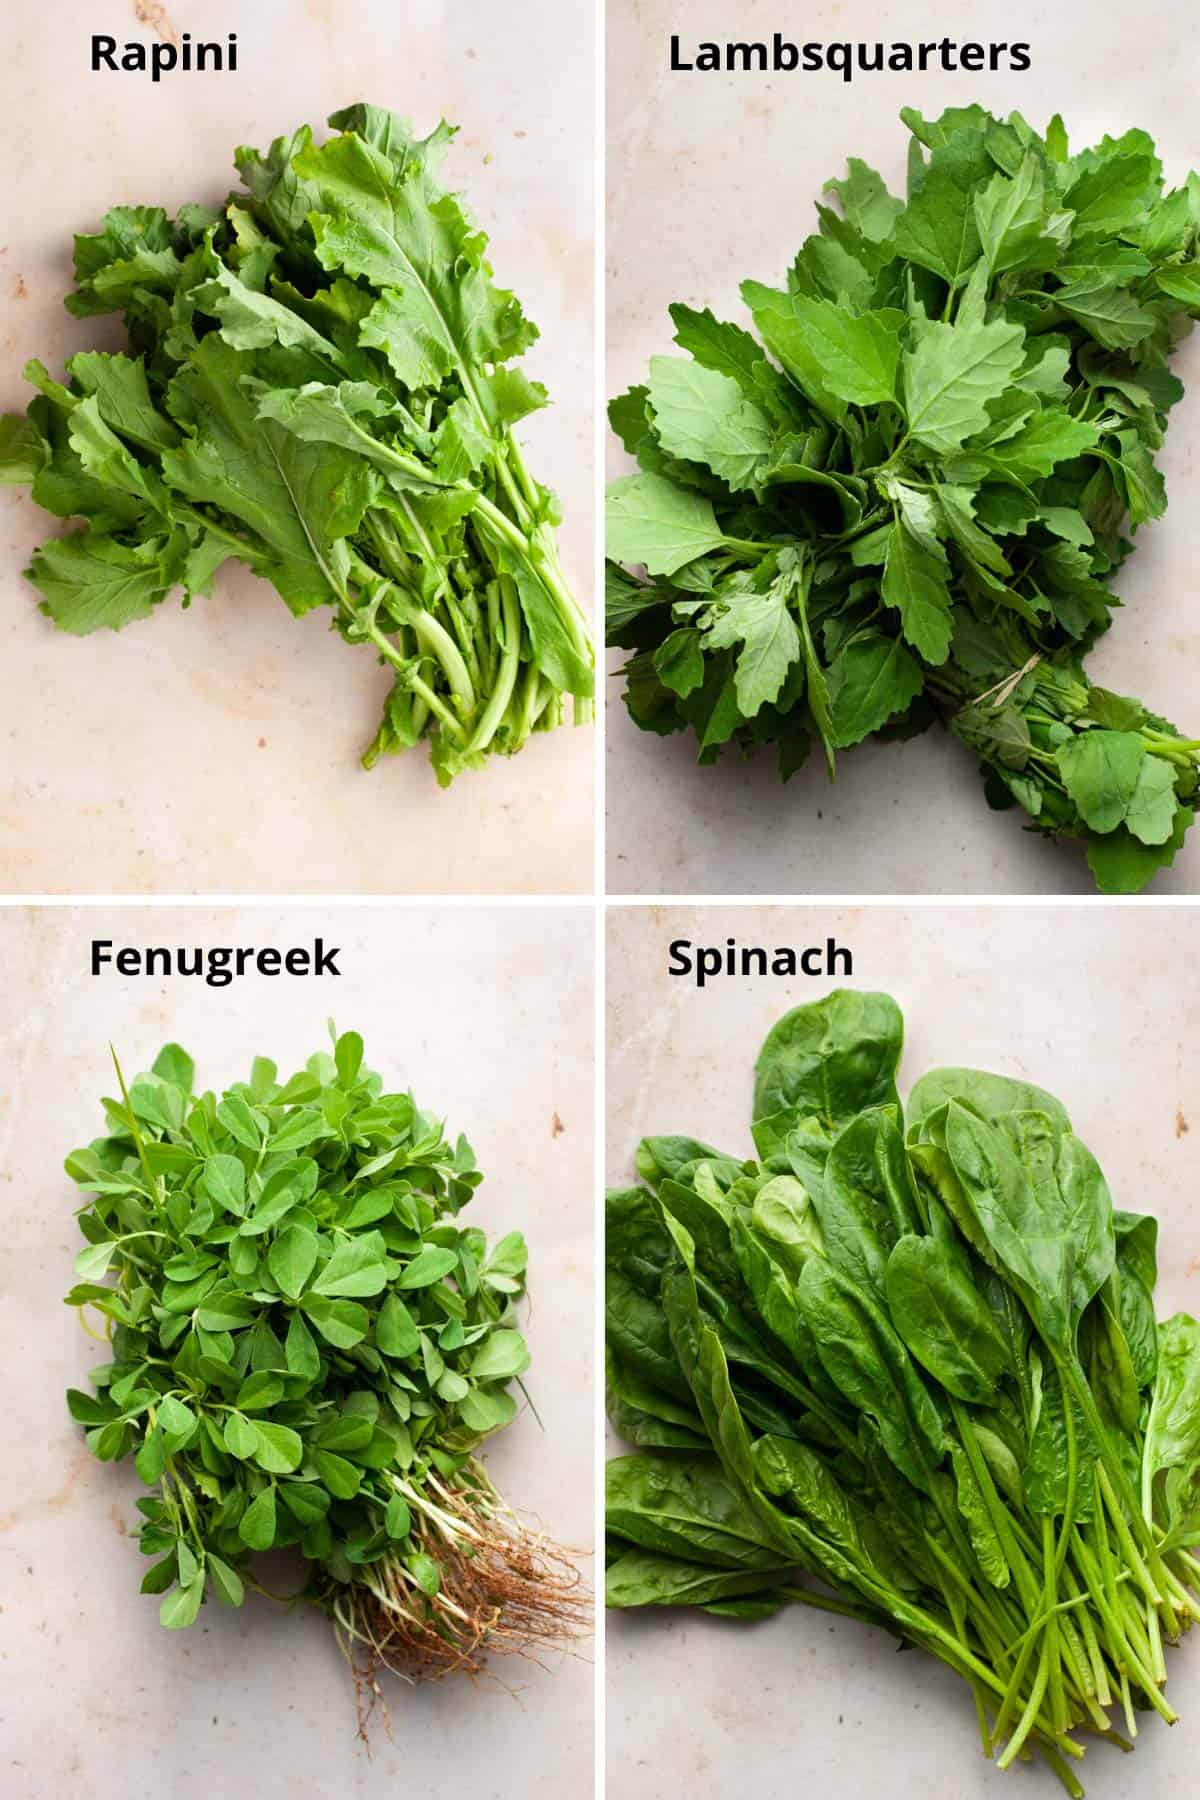 Four bunches of fresh greens for making sarson ka saag - rapini, lambsquarters, fenugreek, and spinach.